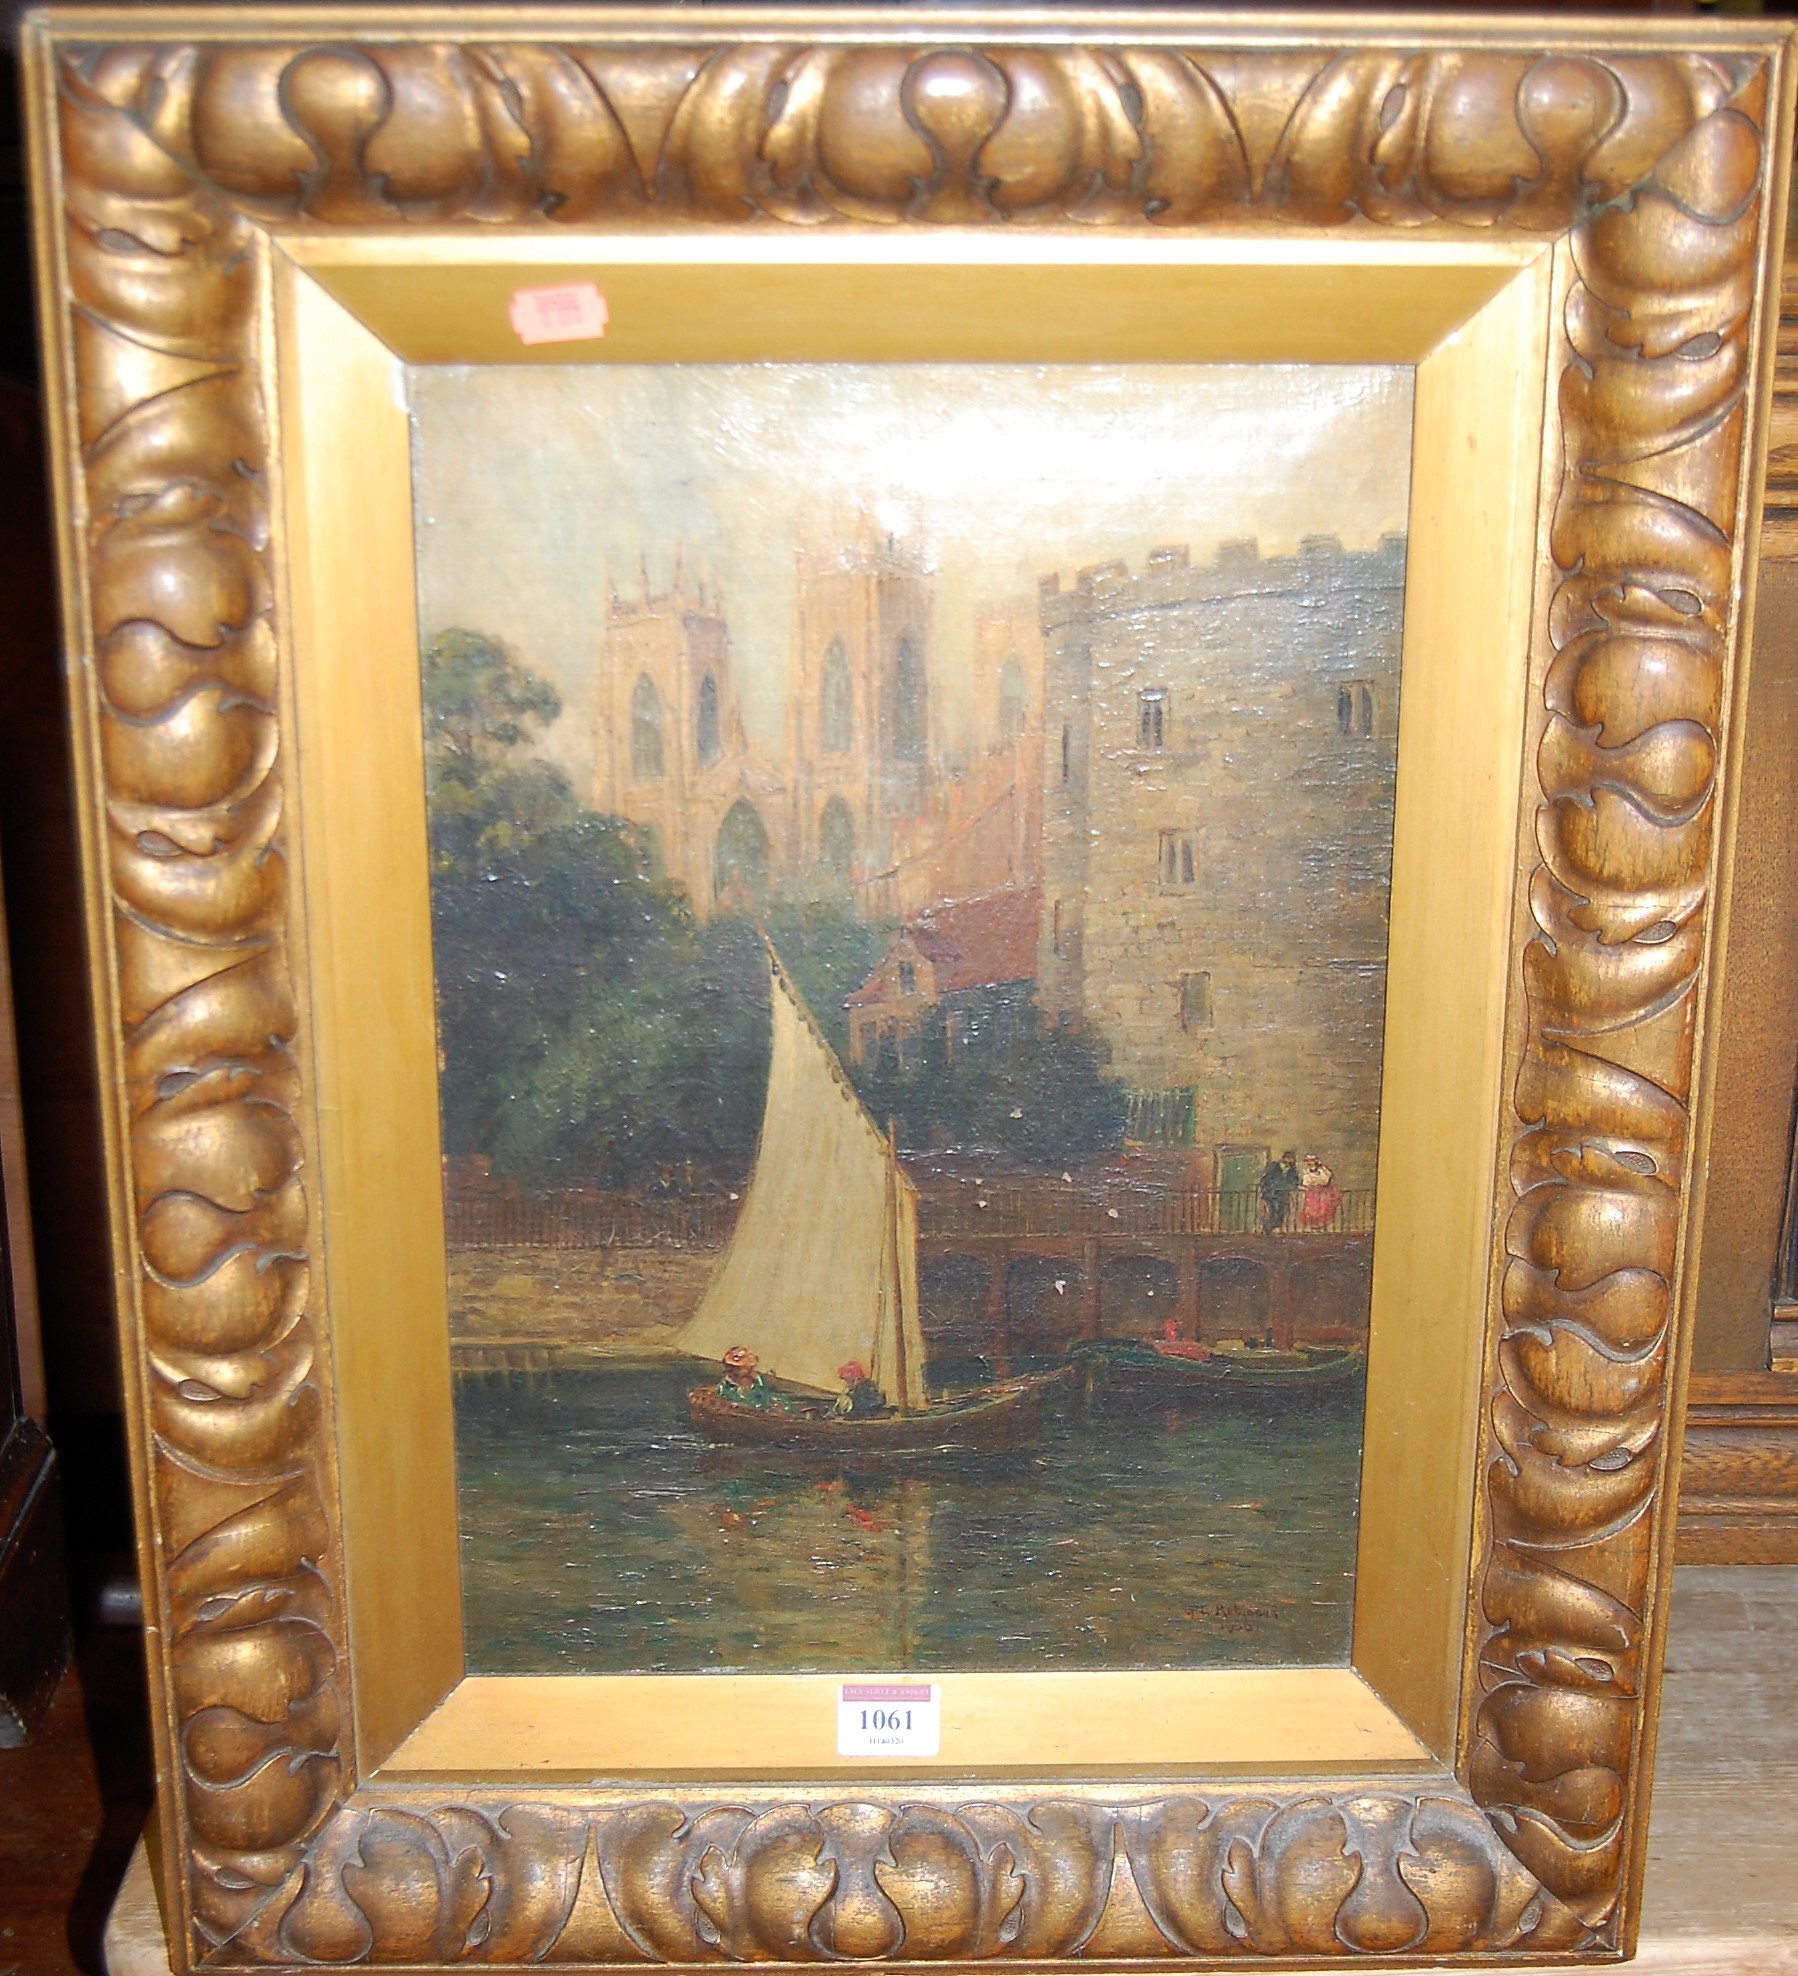 GL Robinson - sailing boat on the river before a cathedral, oil on canvas, signed and dated lower